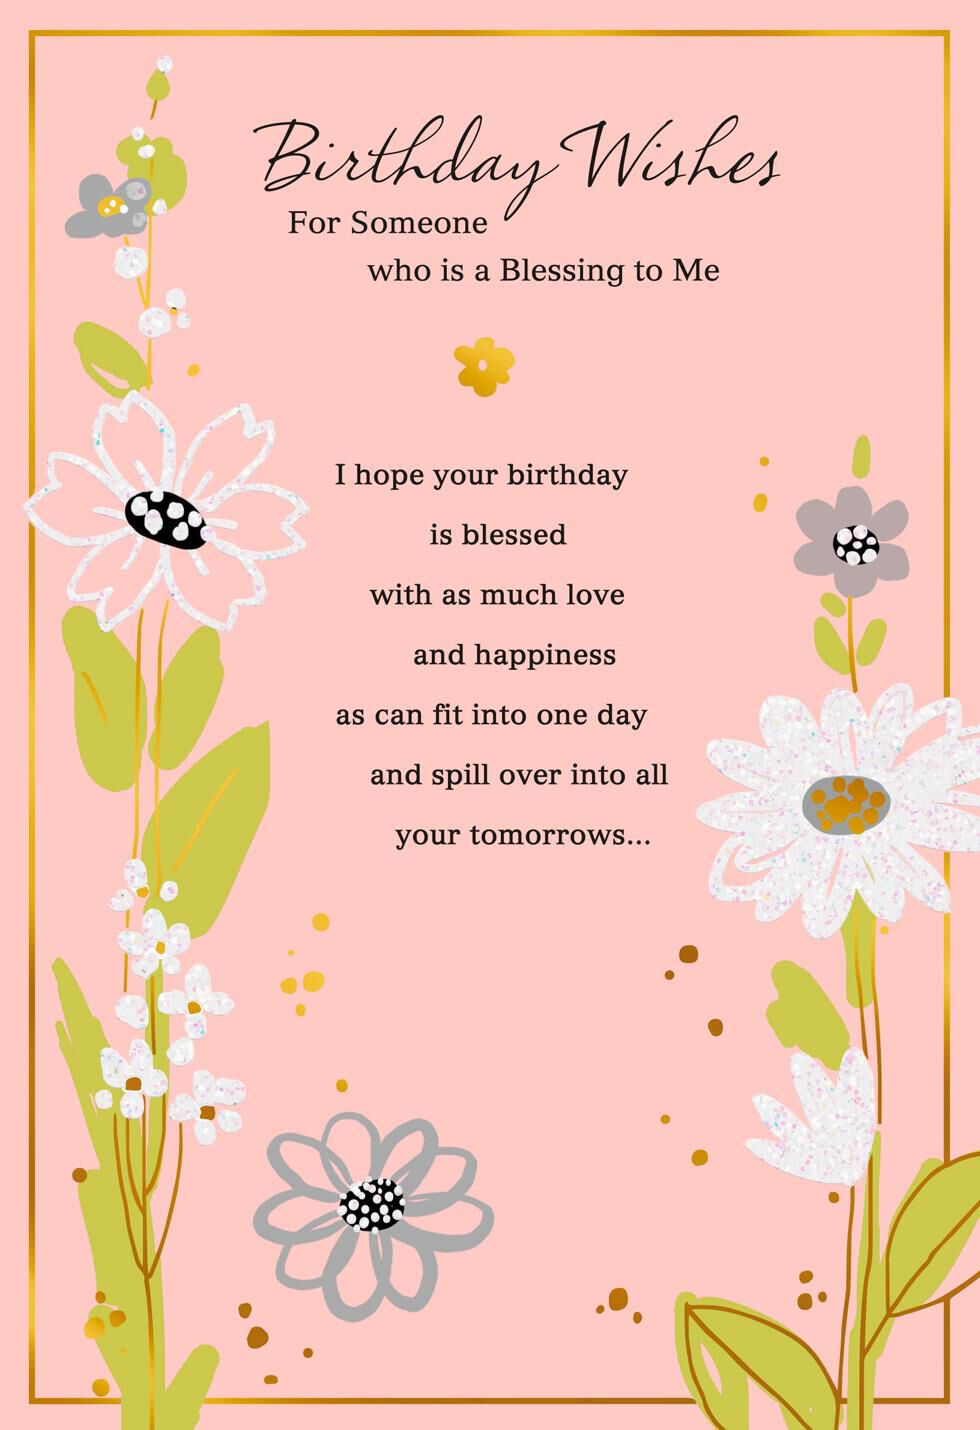 Wish for Purpose and Fulfillment Birthday Card - Greeting Cards - Hallmark